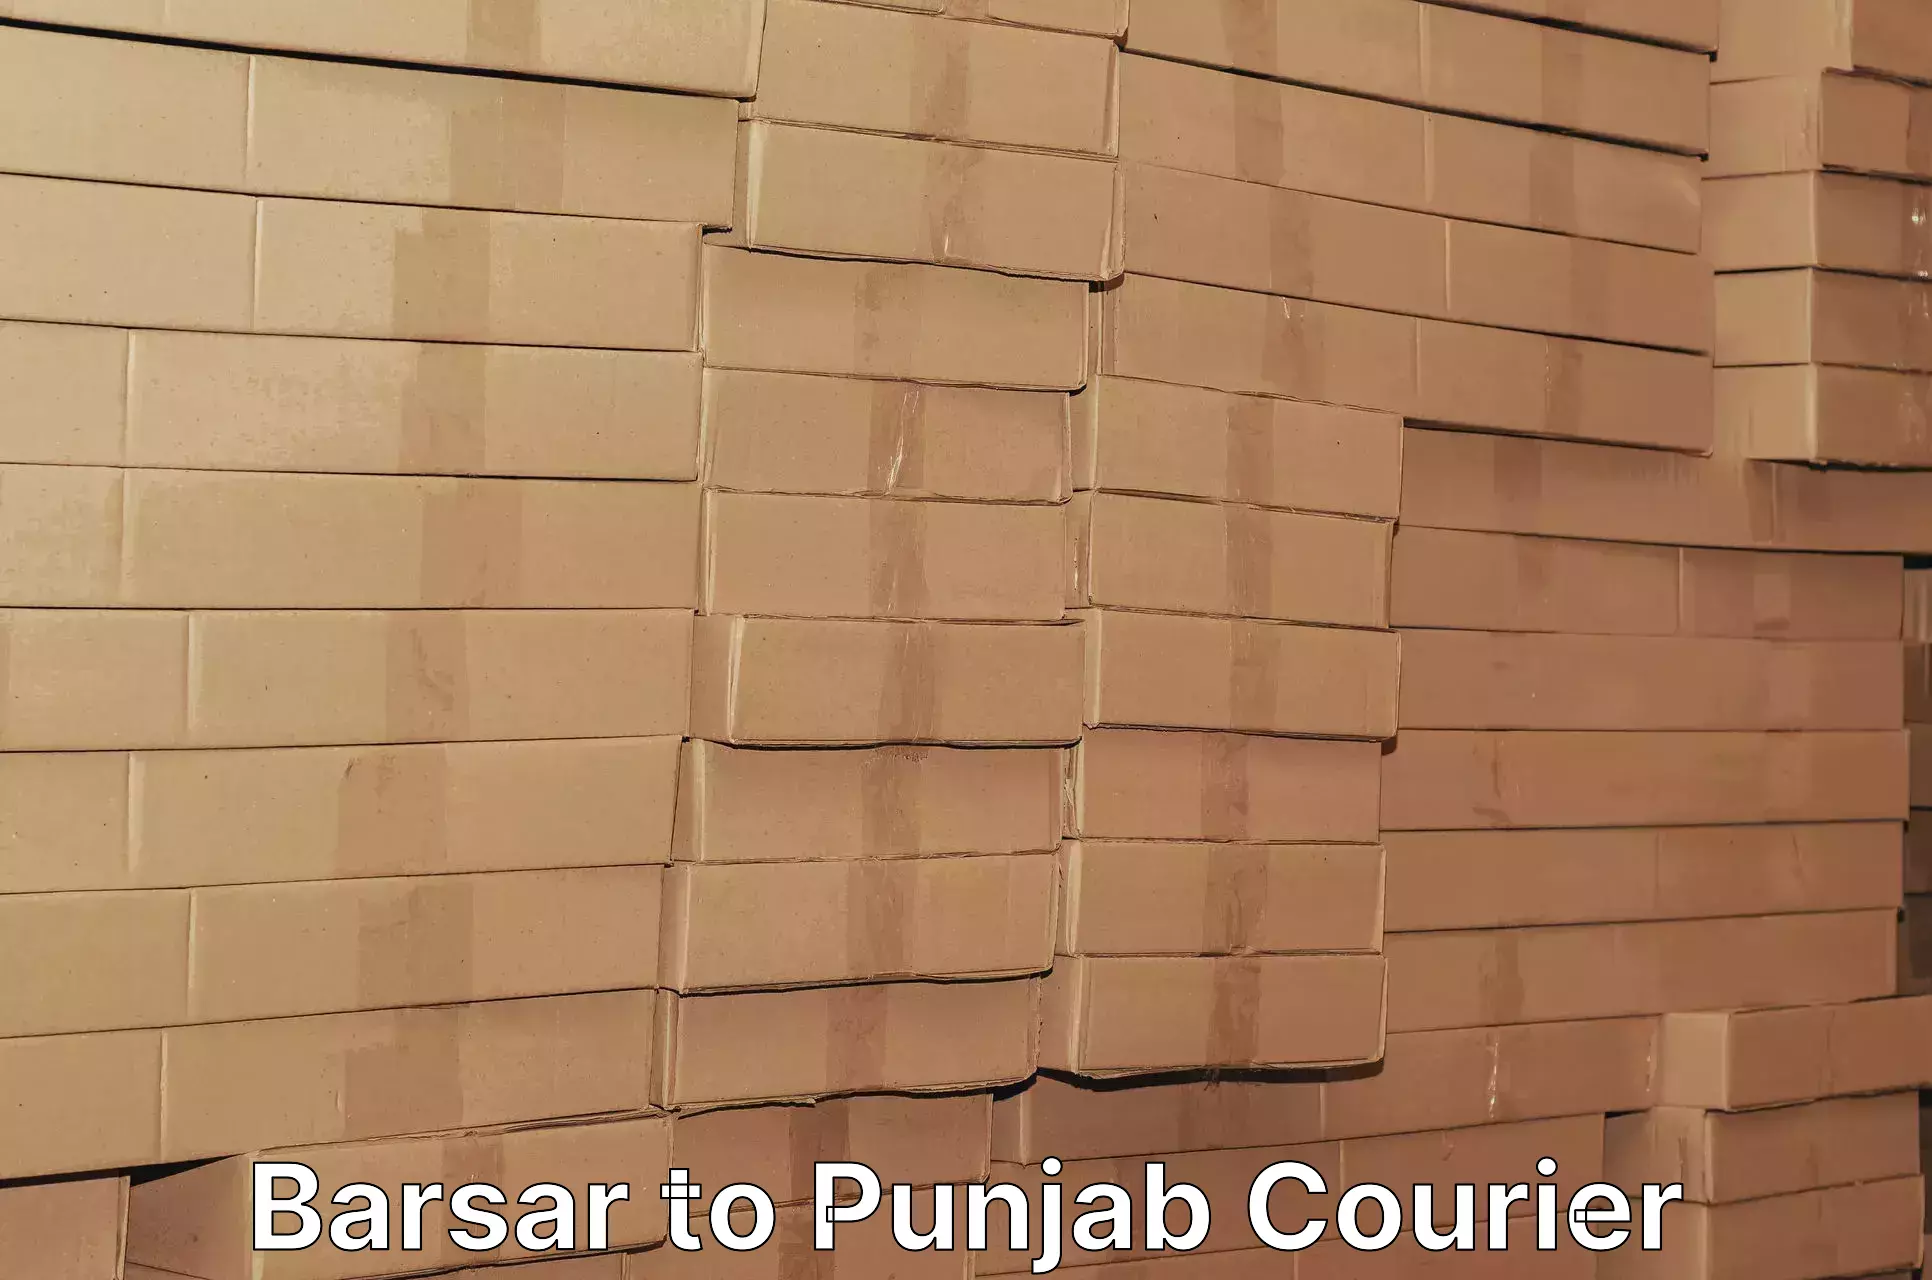 Efficient courier operations Barsar to Punjab